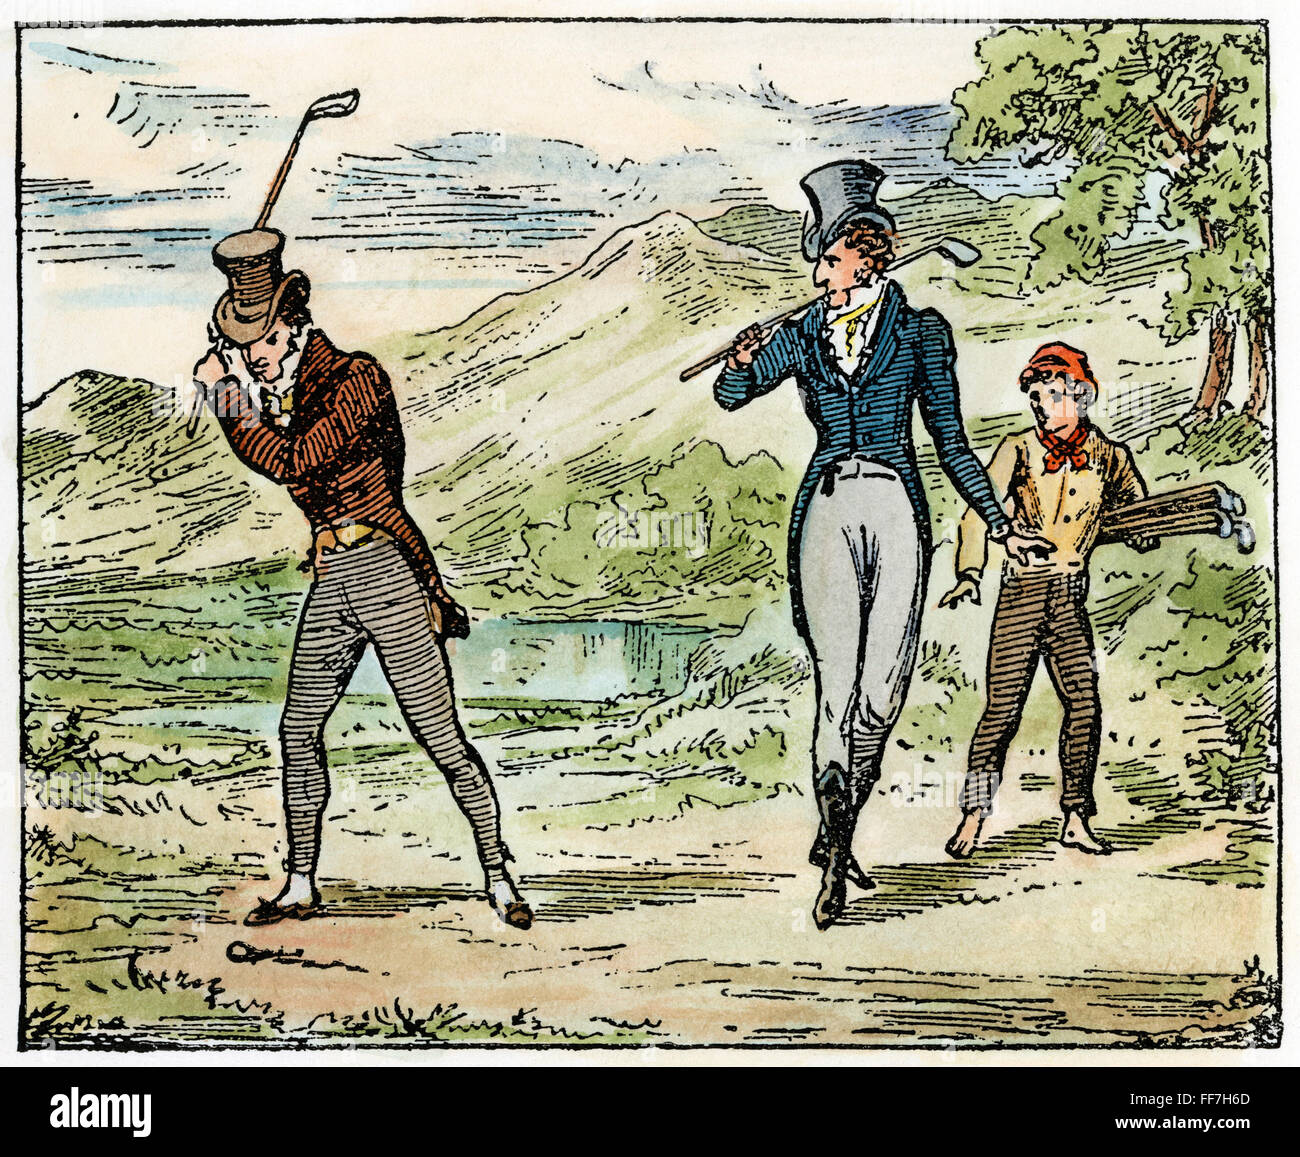 GOLF: SAINT ANDREWS, c1800. /nPlaying golf at the Society of Saint Andrews, Scotland, c1800. Line engraving, early 19th century. Stock Photo